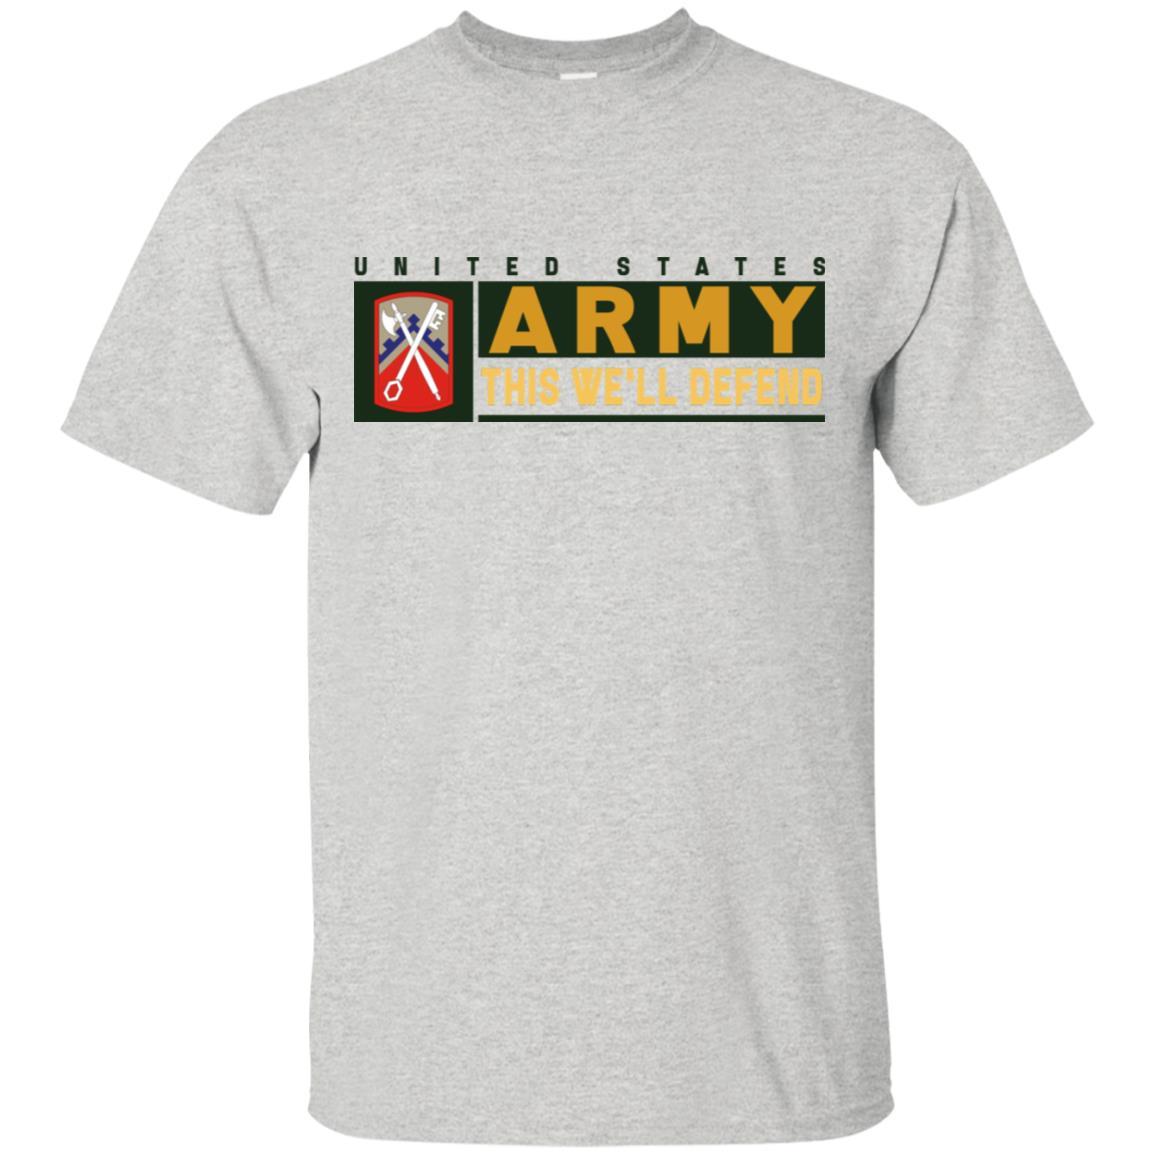 US Army 16TH SUSTAINMENT BRIGADE- This We'll Defend T-Shirt On Front For Men-TShirt-Army-Veterans Nation